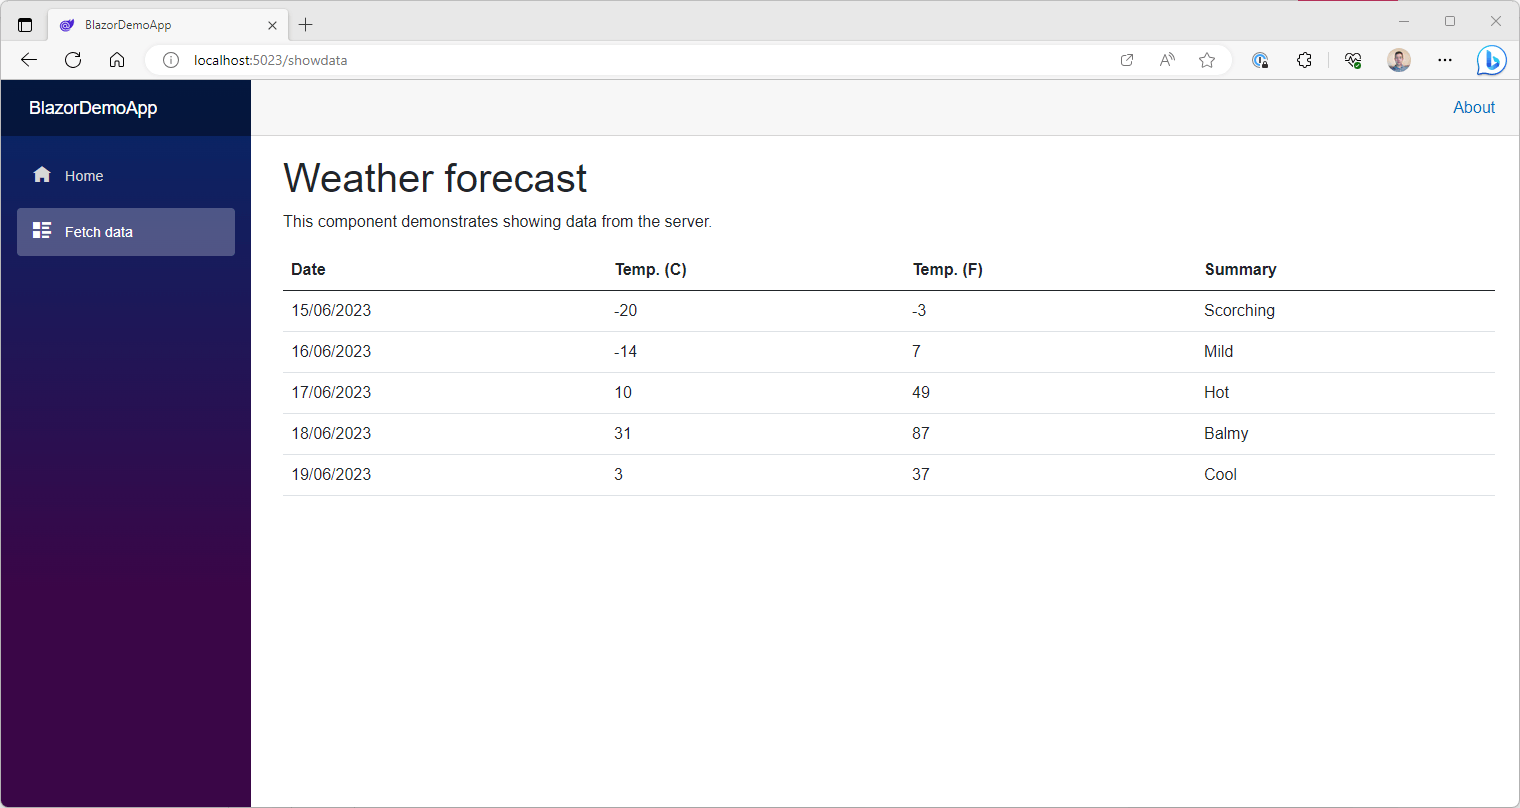 Fetch data page: A page showing weather data, namely dates, temperatures, and a summary